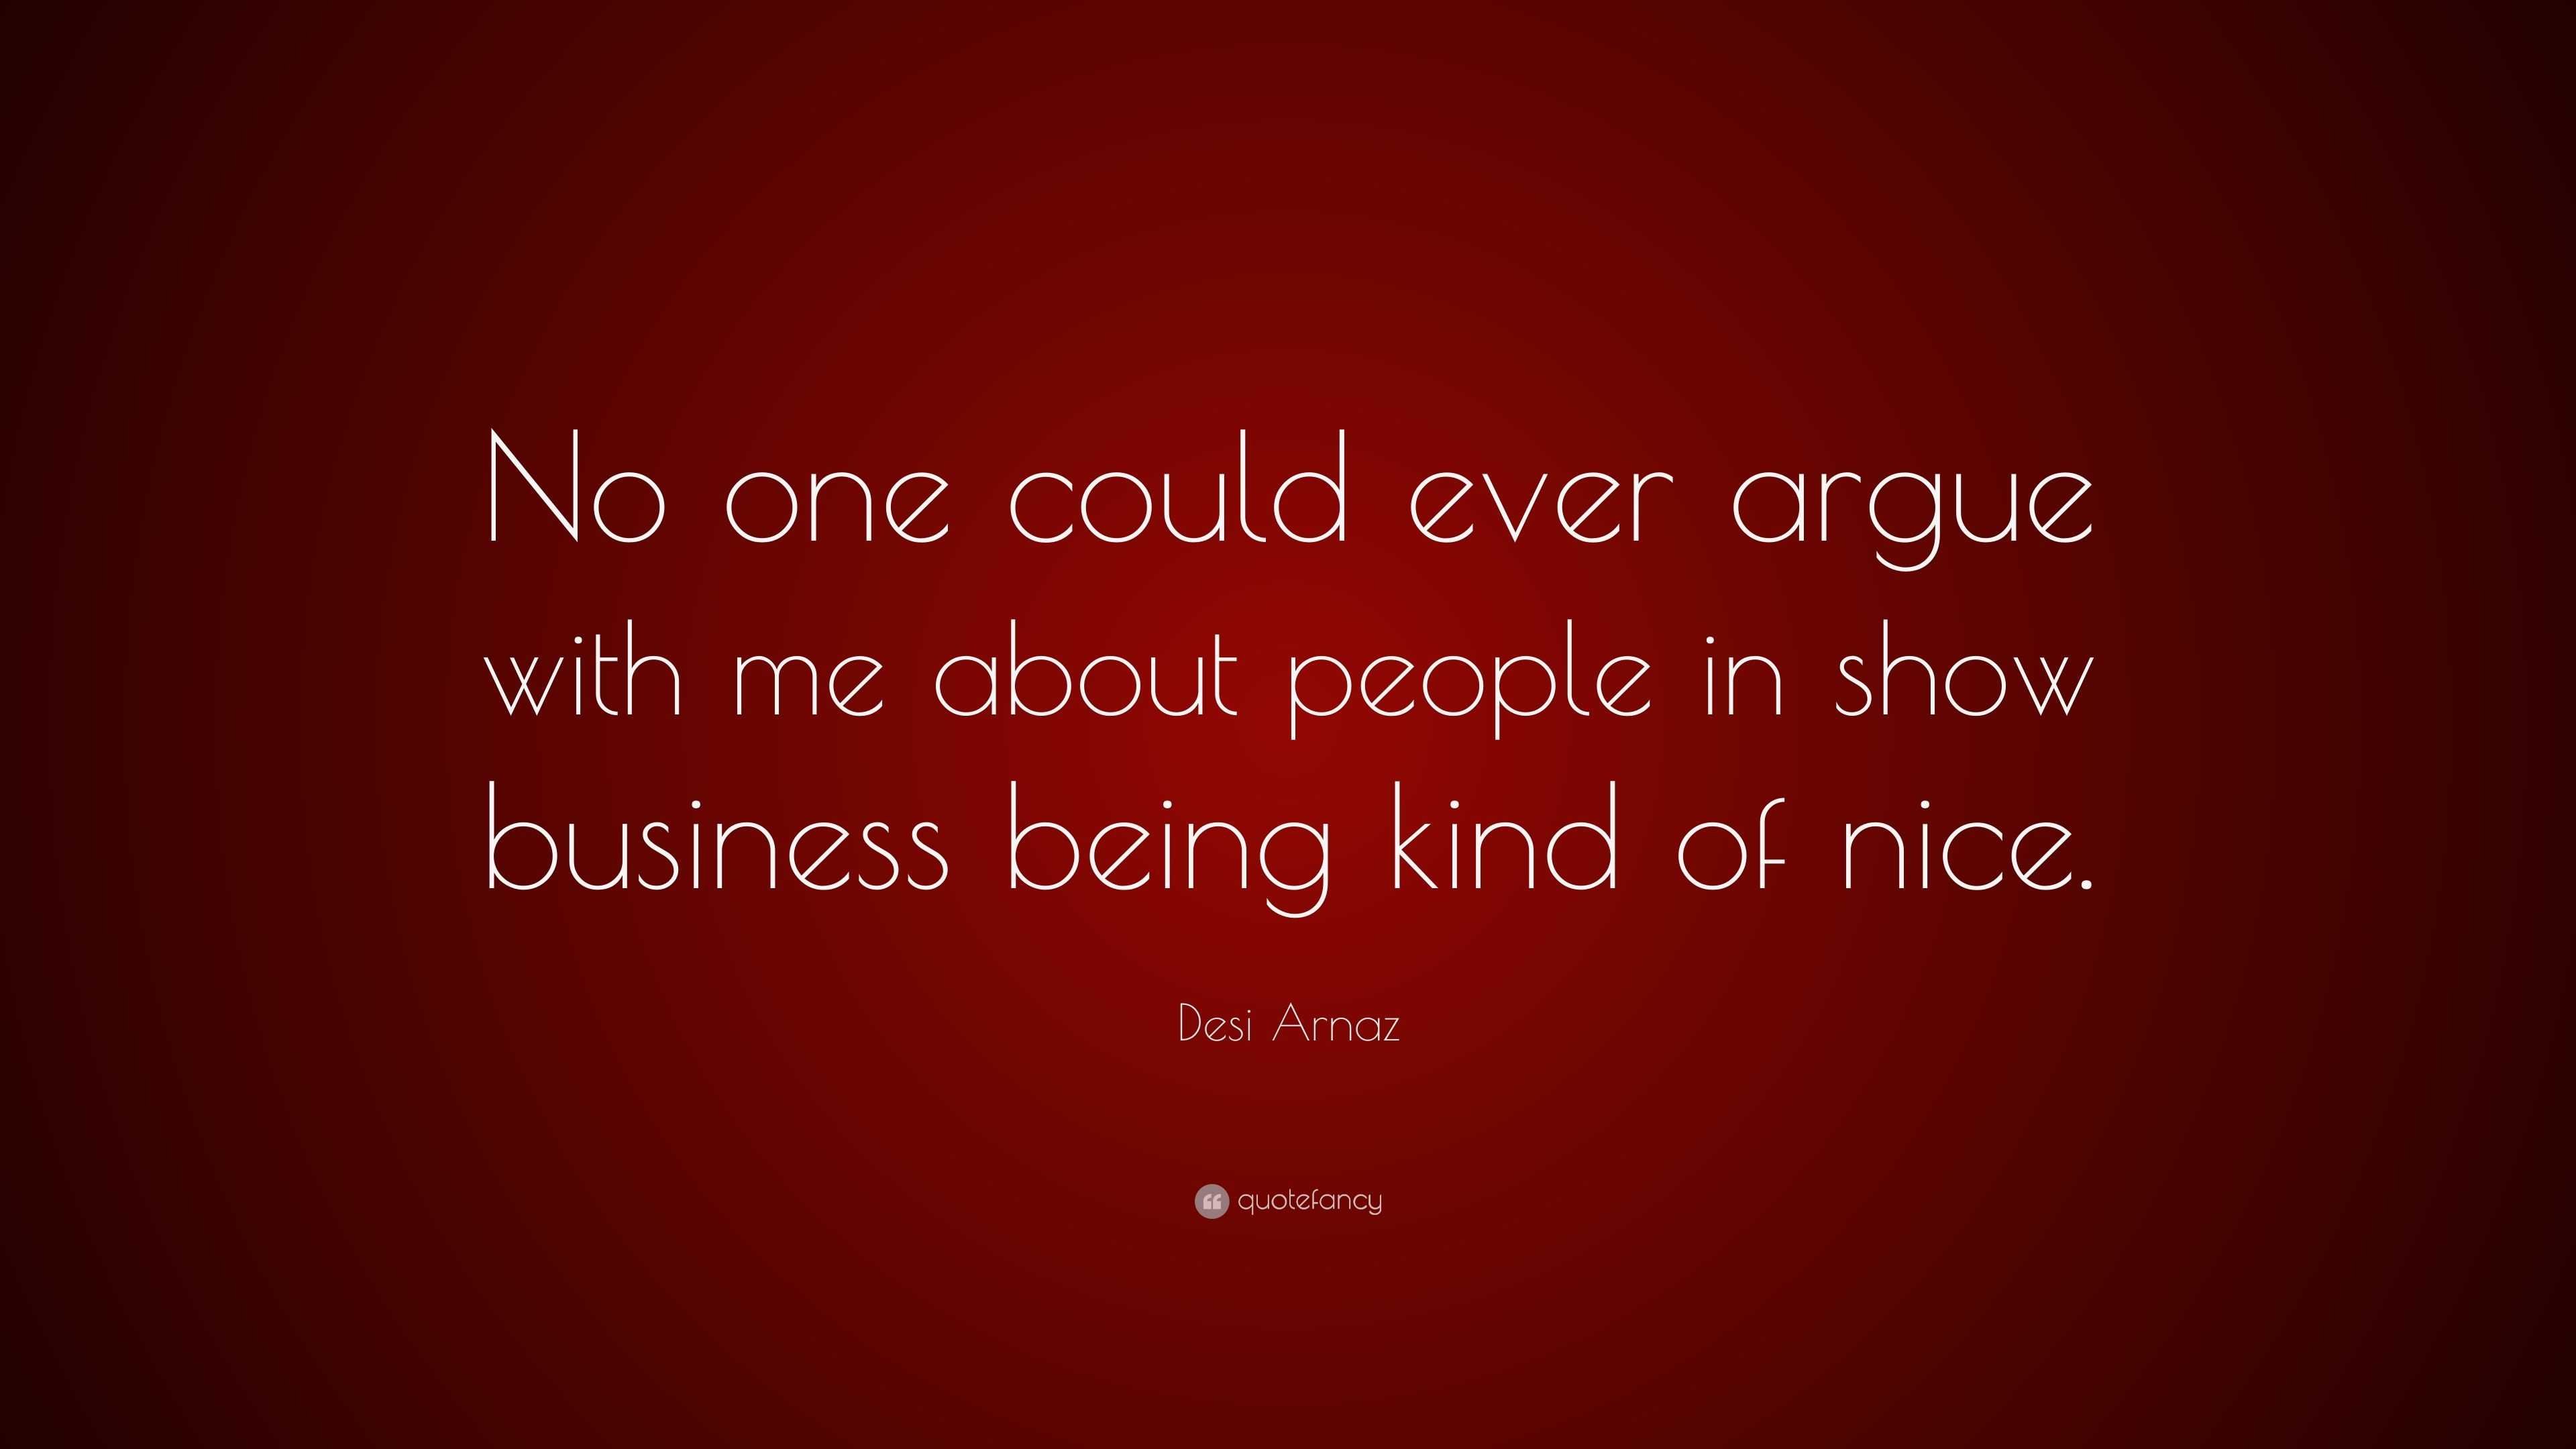 Desi Arnaz Quote “no One Could Ever Argue With Me About People In Show Business Being Kind Of